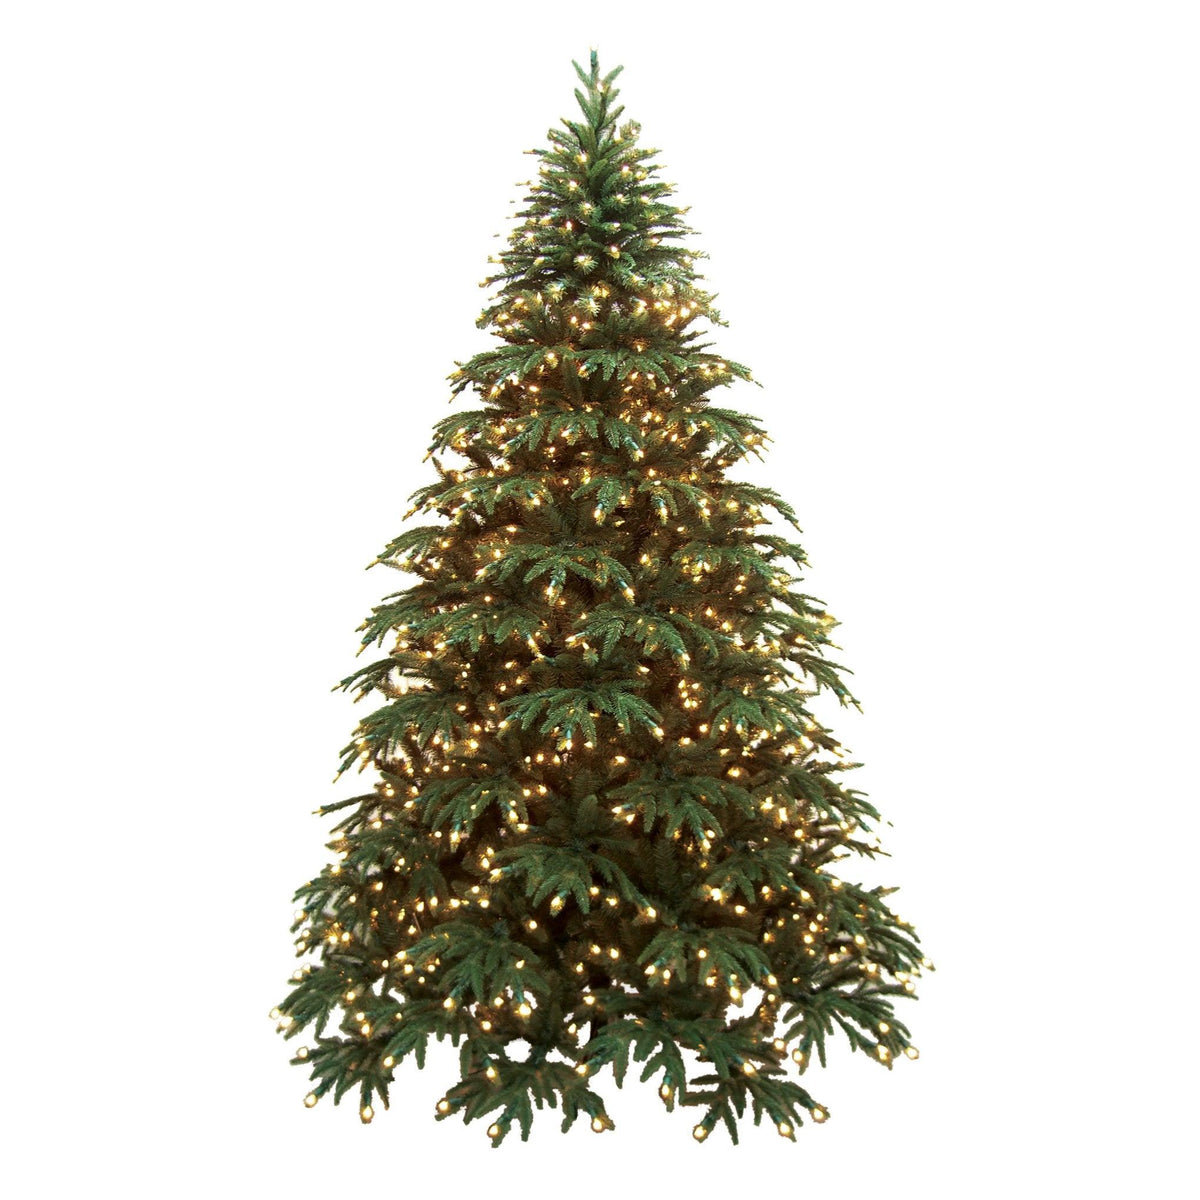 The slim design, measuring 4.5 feet at its base, ensures that you can place this majestic tree in various nooks and corners, bringing holiday cheer to every part of your home. The New Greenland Fir provides the perfect backdrop for your cherished ornaments and decorations, making it the ideal setting for creating cherished holiday memories with your loved ones. 